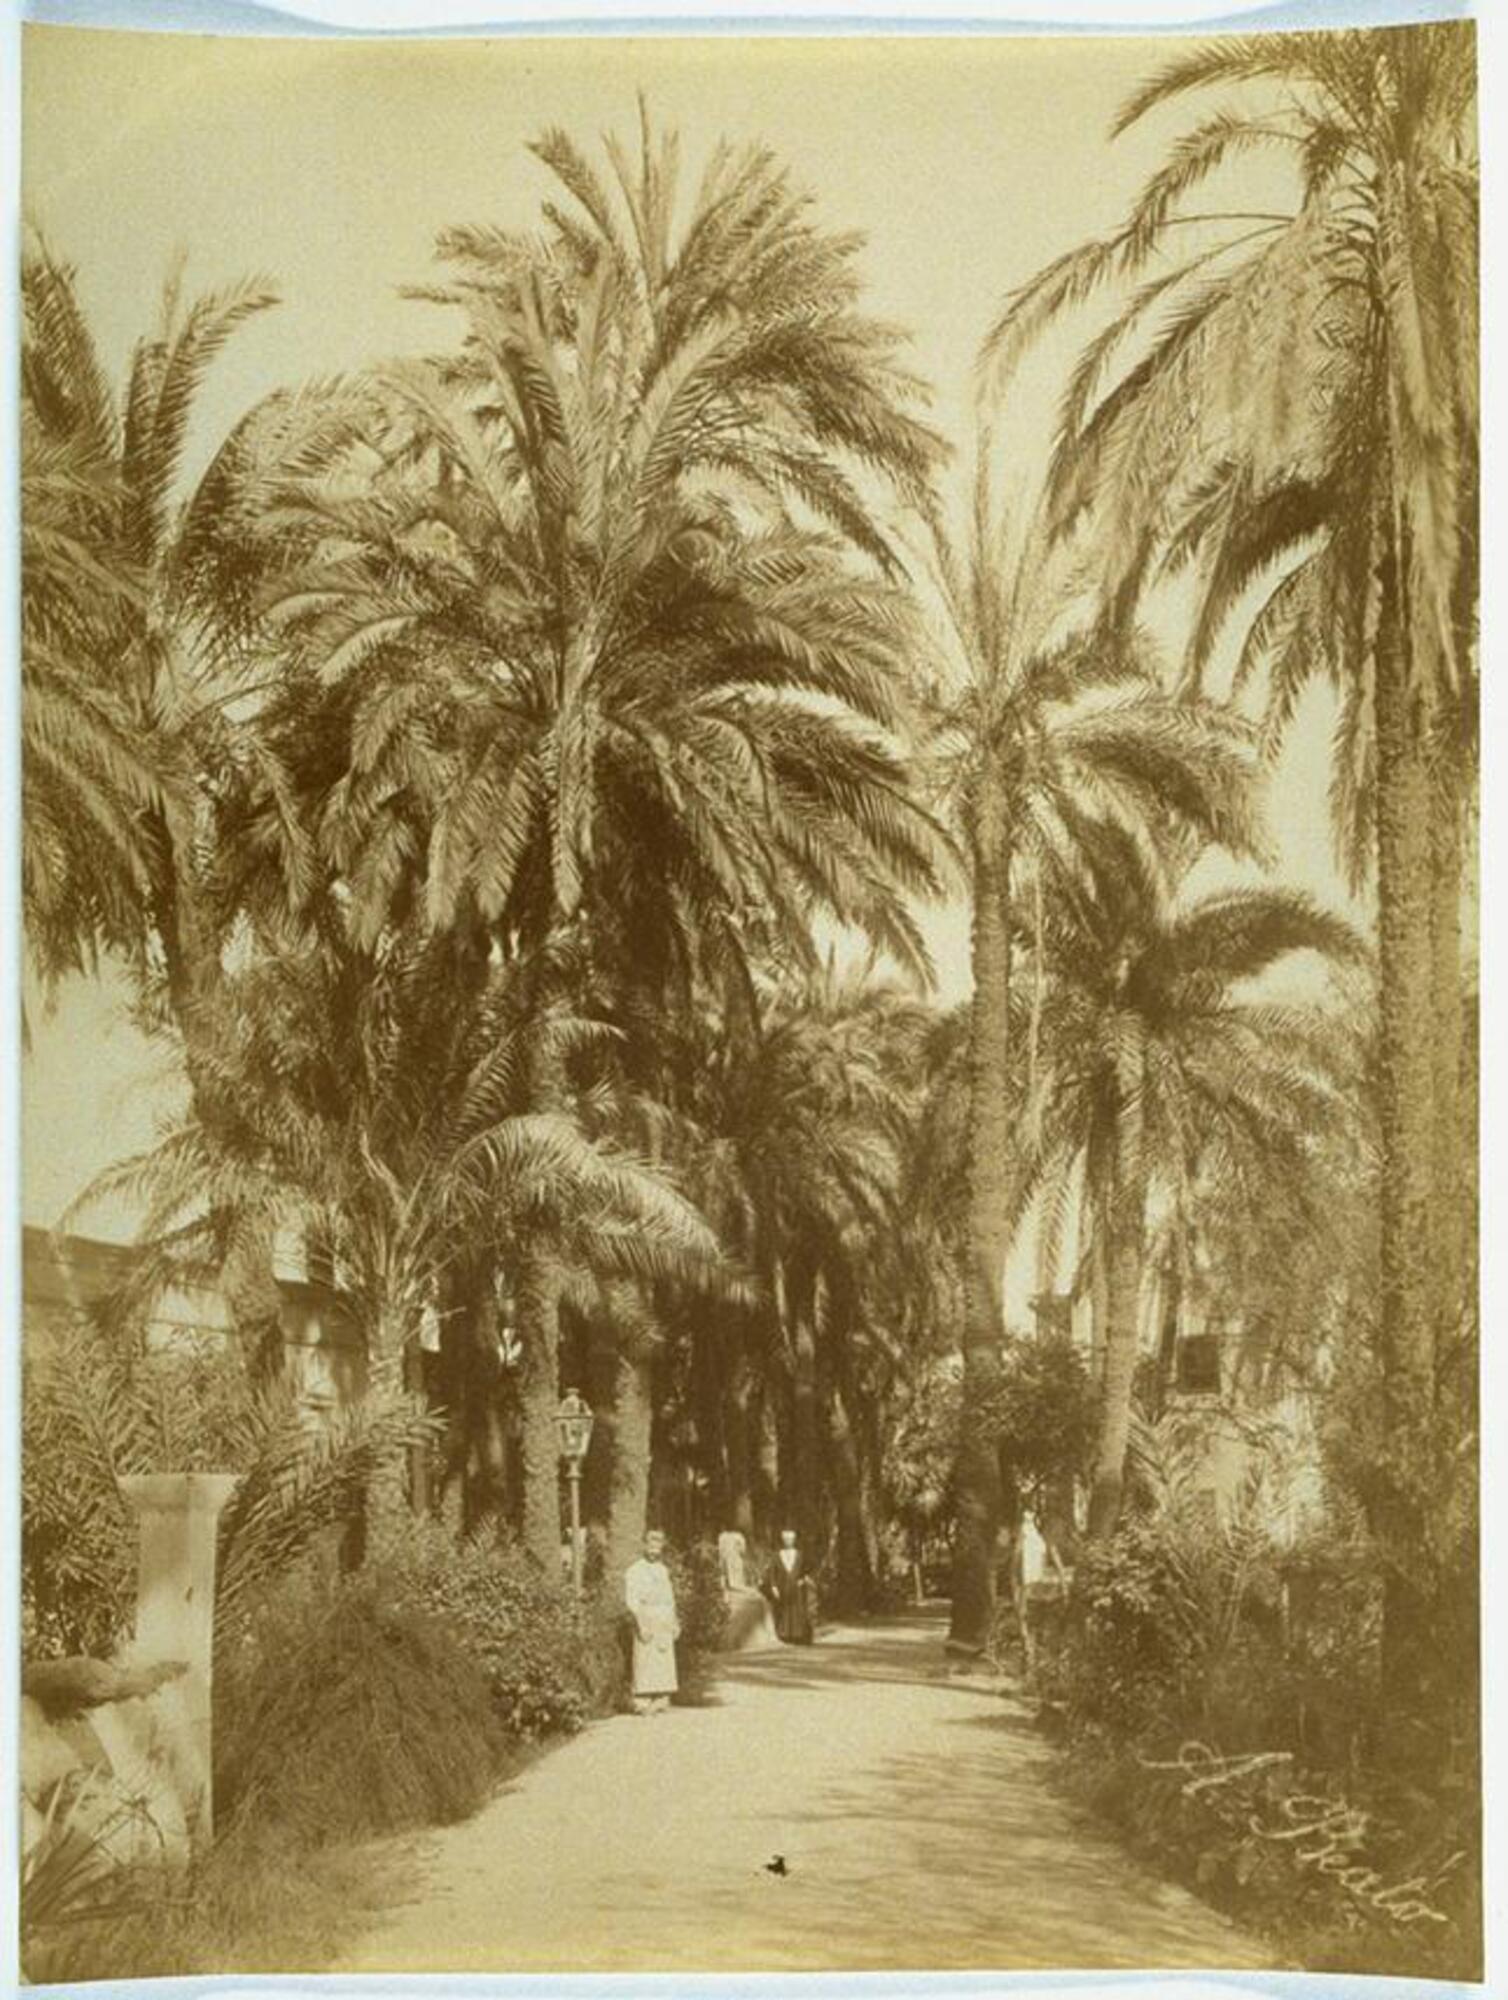 This photograph depicts a view of a palm tree-lined path in a city park. Two men stand on the path and face the camera.